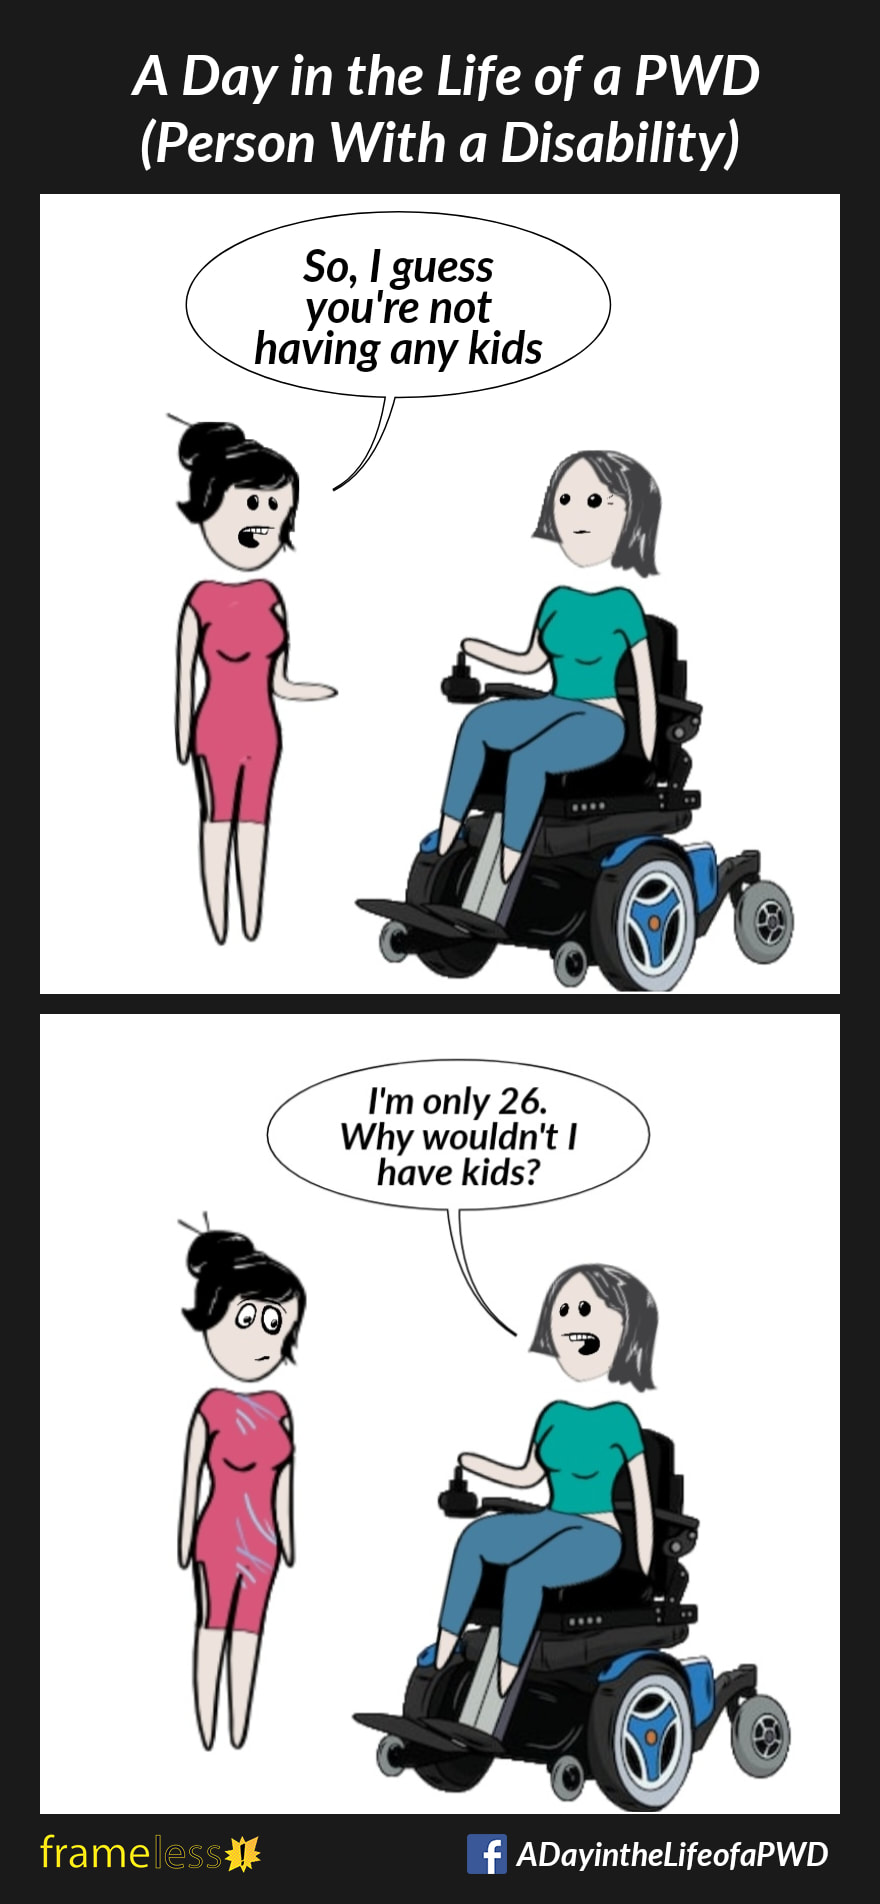 COMIC STRIP 
A Day in the Life of a PWD (Person With a Disability) 

Frame 1:
A woman in a power wheelchair is chatting with an acquaintance. 
ACQUAINTANCE: So I guess you're not having any kids

Frame 2:
WOMAN: I'm only 26. Why wouldn't I have kids?